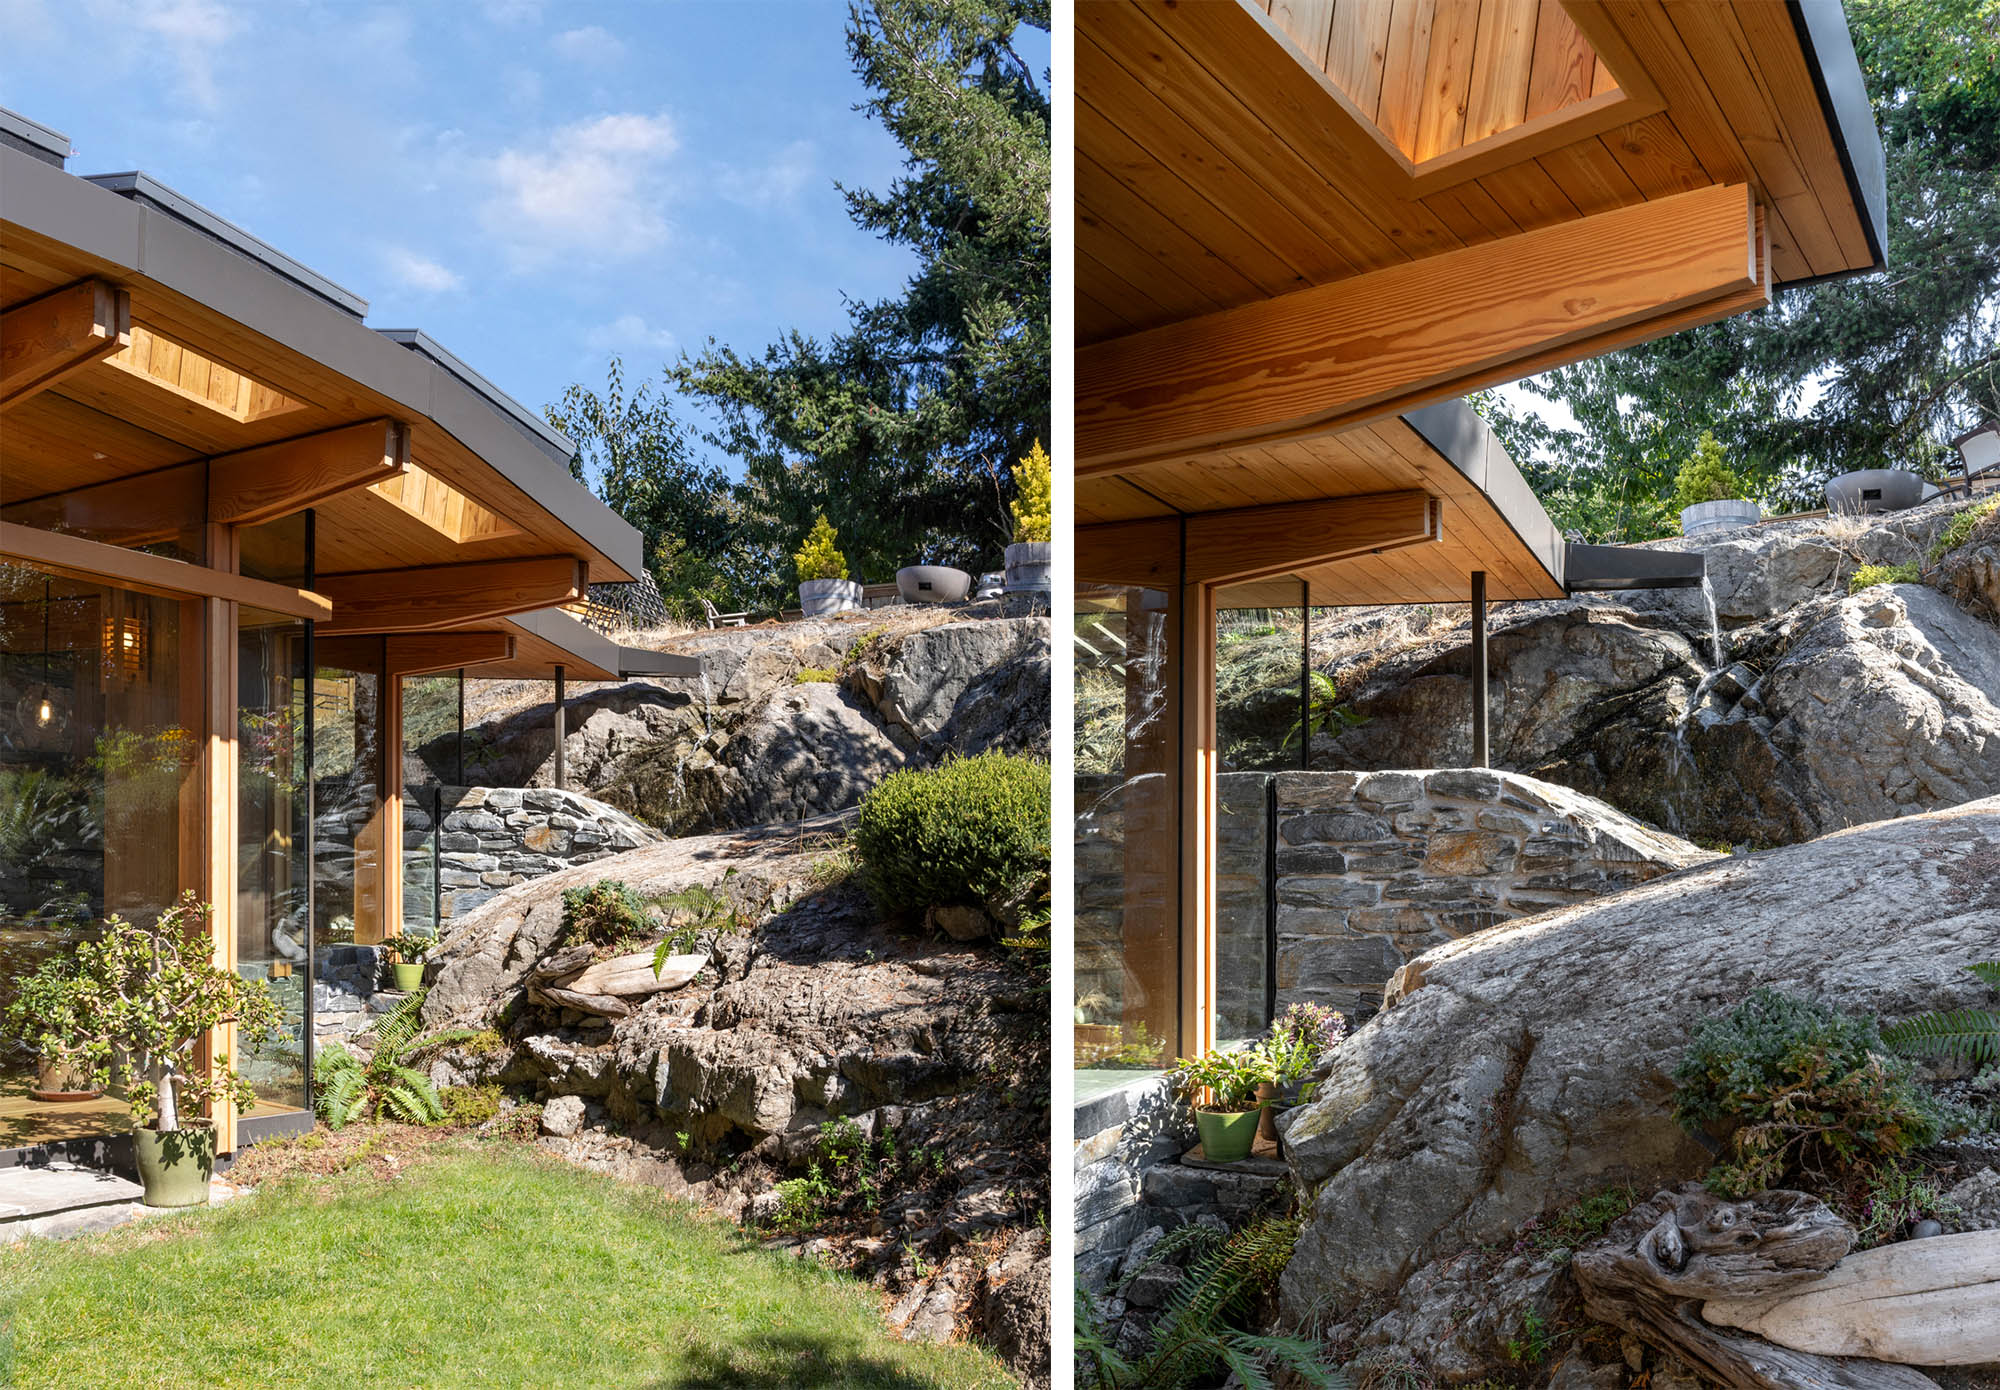 Wood timber detailing featured in the Grotto sunroom addition.